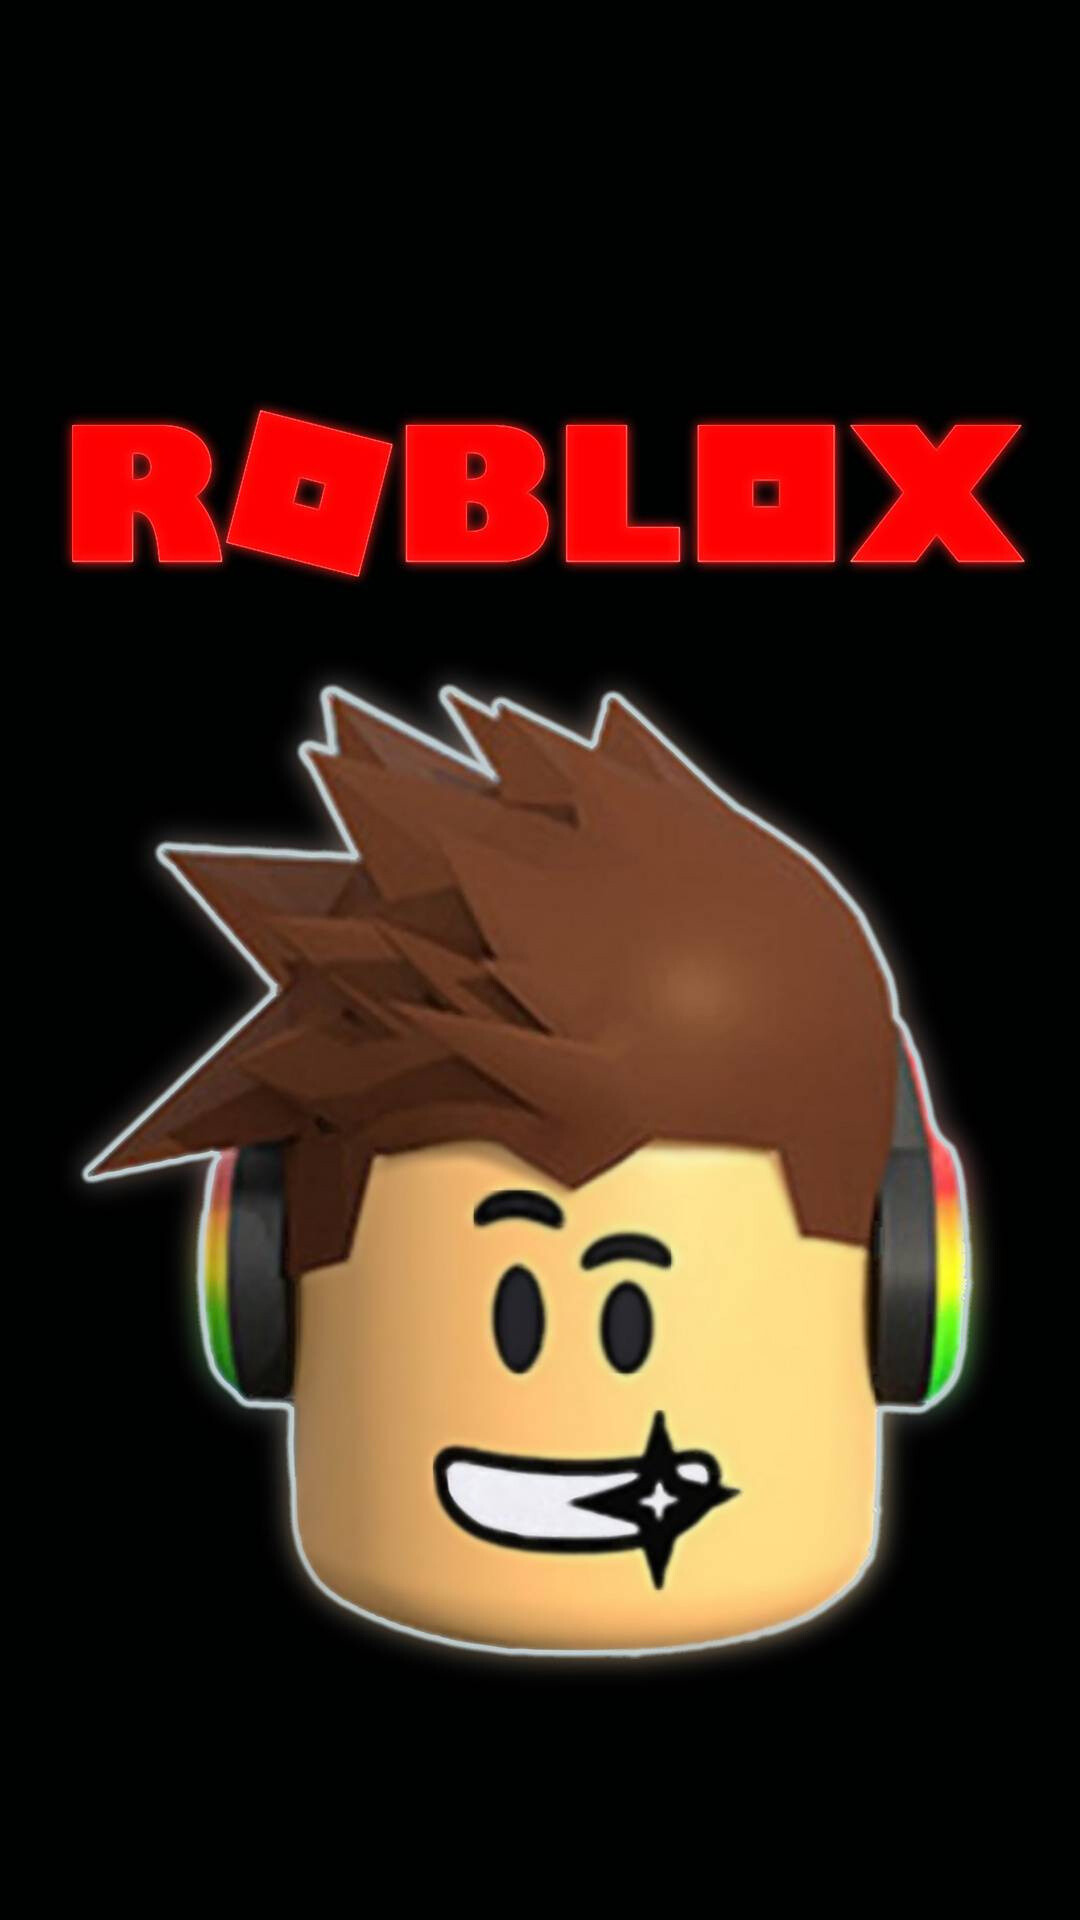 Roblox: Has its own virtual economy, with a virtual currency called Robux. 1080x1920 Full HD Background.